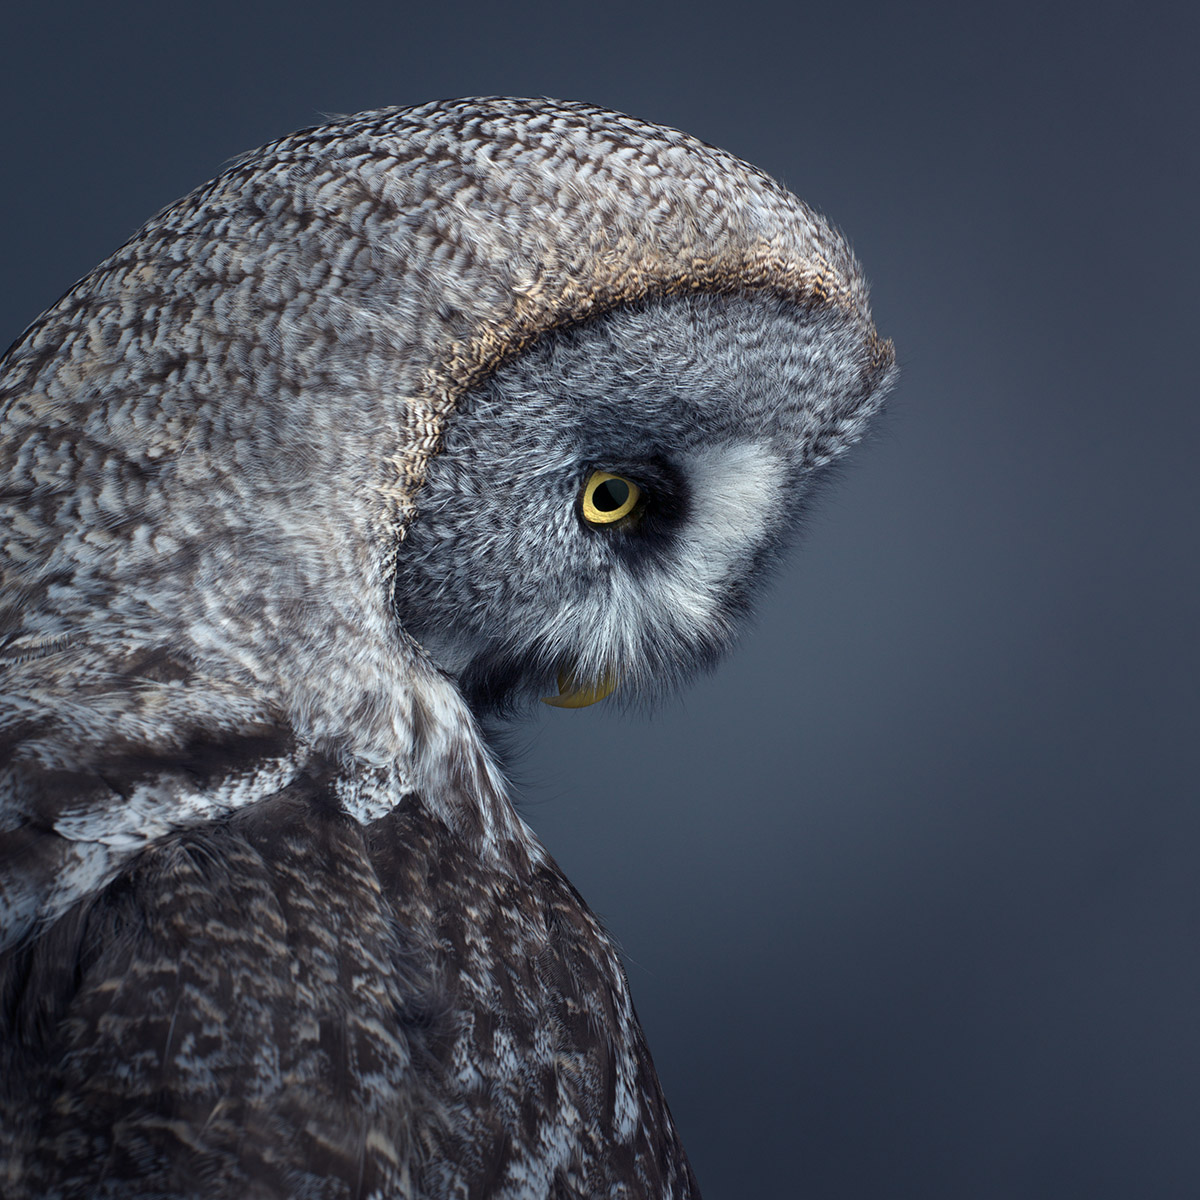 Mark-Harvey-photography_In-Flight-collection-GREAT-GREAT-OWL_lowres